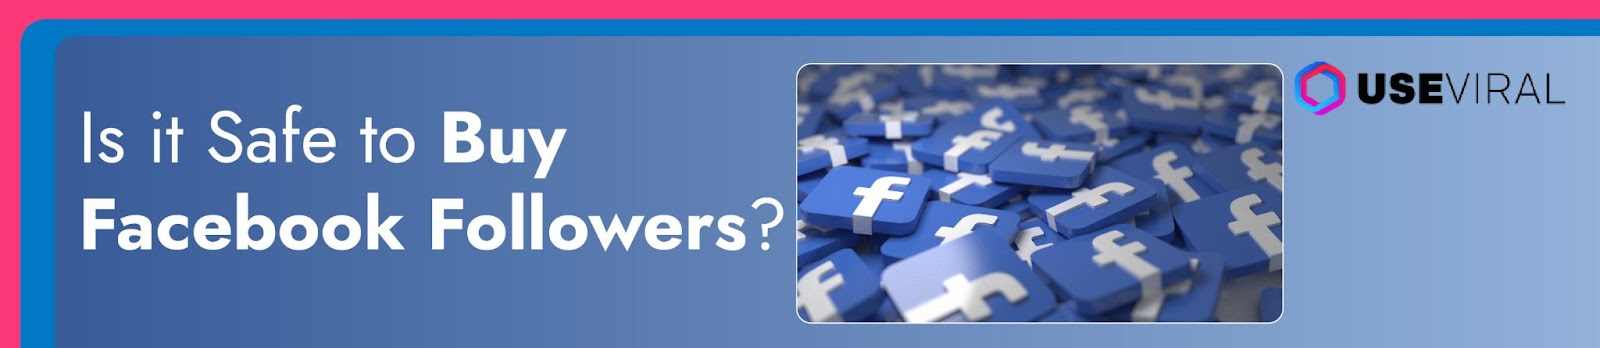 Is it Safe to Buy Facebook Followers?